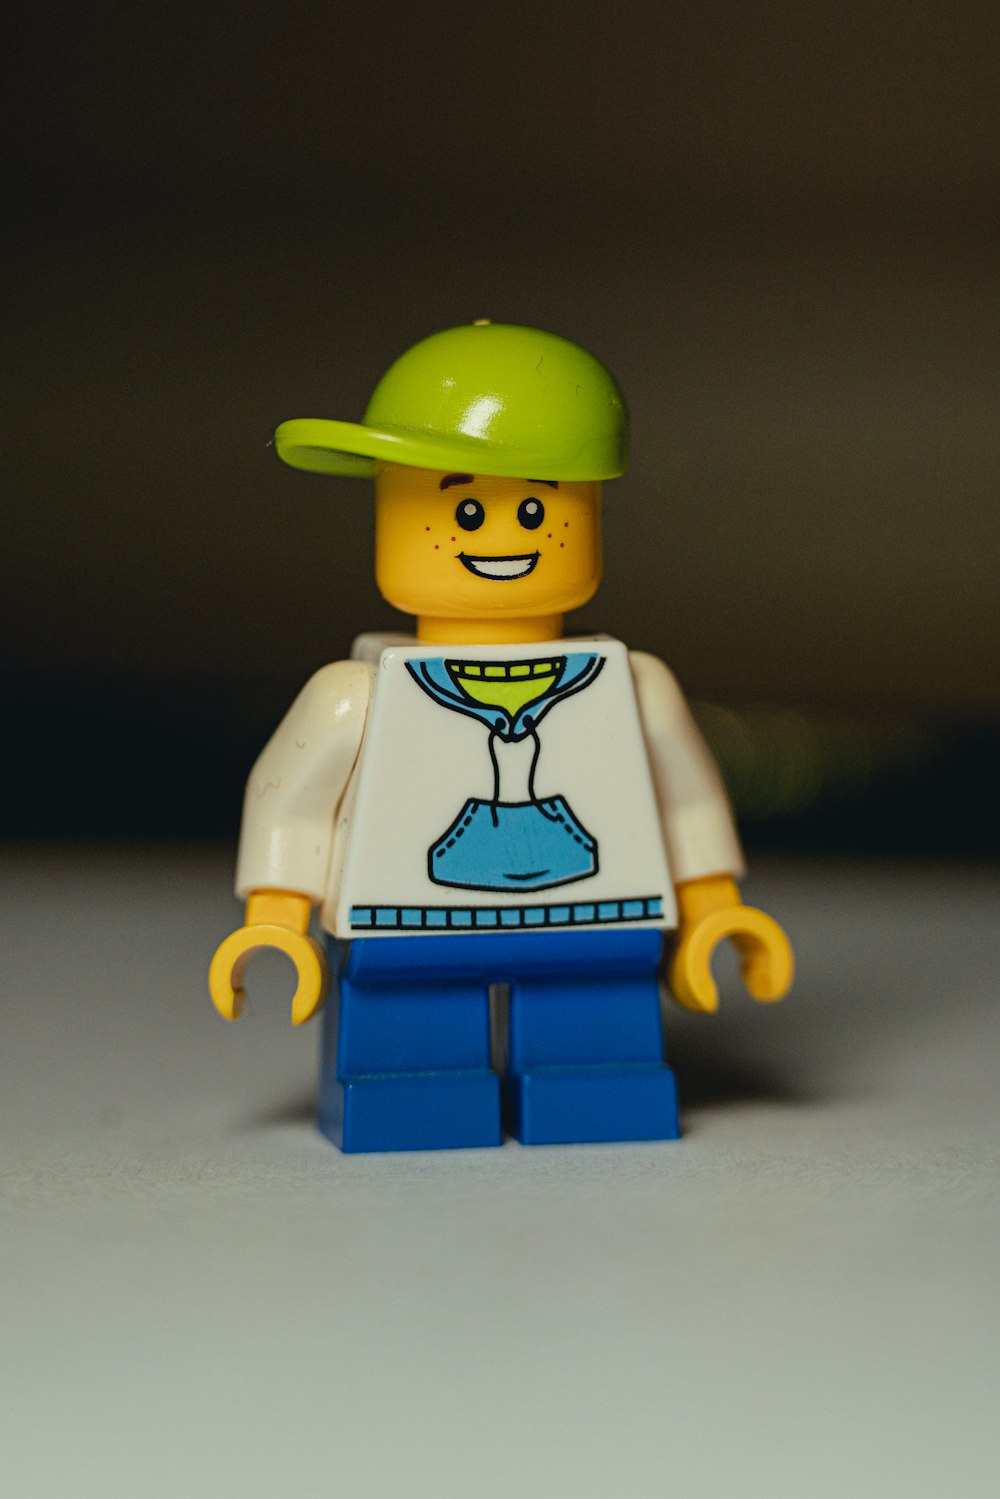 a lego man wearing a green hat and a white shirt